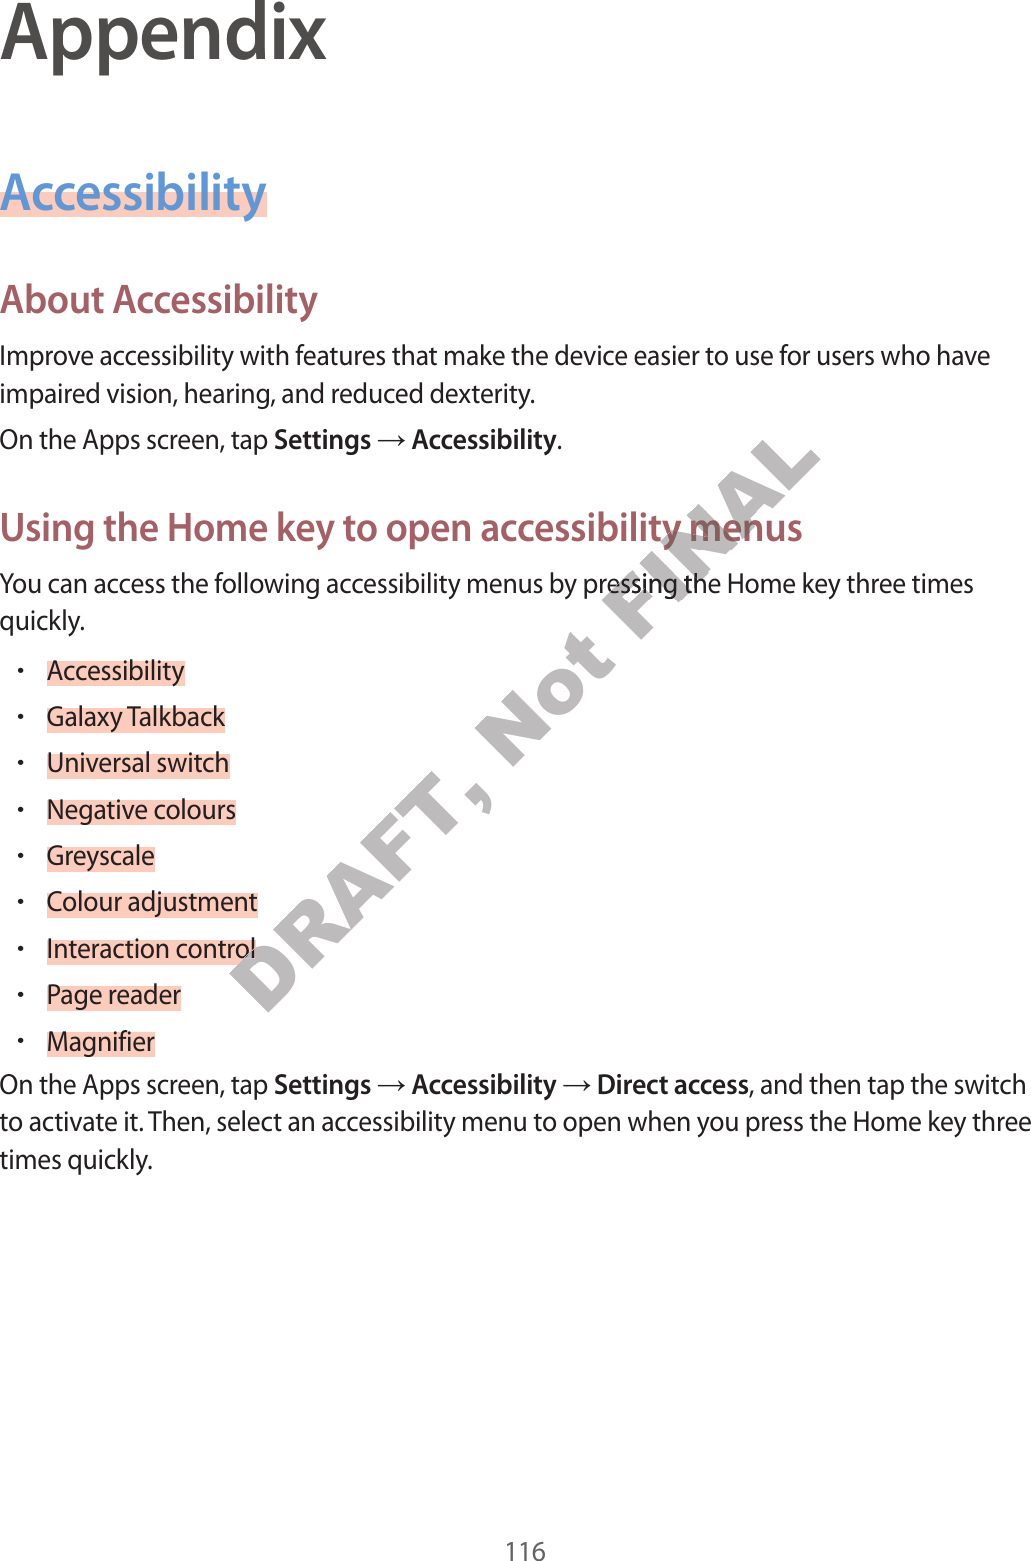 116AppendixAccessibilityAbout AccessibilityImprove accessibility with features that make the device easier to use for users who have impaired vision, hearing, and reduced dexterity.On the Apps screen, tap Settings  Accessibility.Using the Home key to open accessibility menusYou can access the following accessibility menus by pressing the Home key three times quickly.•Accessibility•Galaxy Talkback•Universal switch•Negative colours•Greyscale•Colour adjustment•Interaction control•Page reader•MagnifierOn the Apps screen, tap Settings  Accessibility  Direct access, and then tap the switch to activate it. Then, select an accessibility menu to open when you press the Home key three times quickly.DRAFT, DRAFT, DRAFT, Interaction controltroltrolNot FINALessibility menusessibility menusy pressing the Home key thry pressing the Home key thr